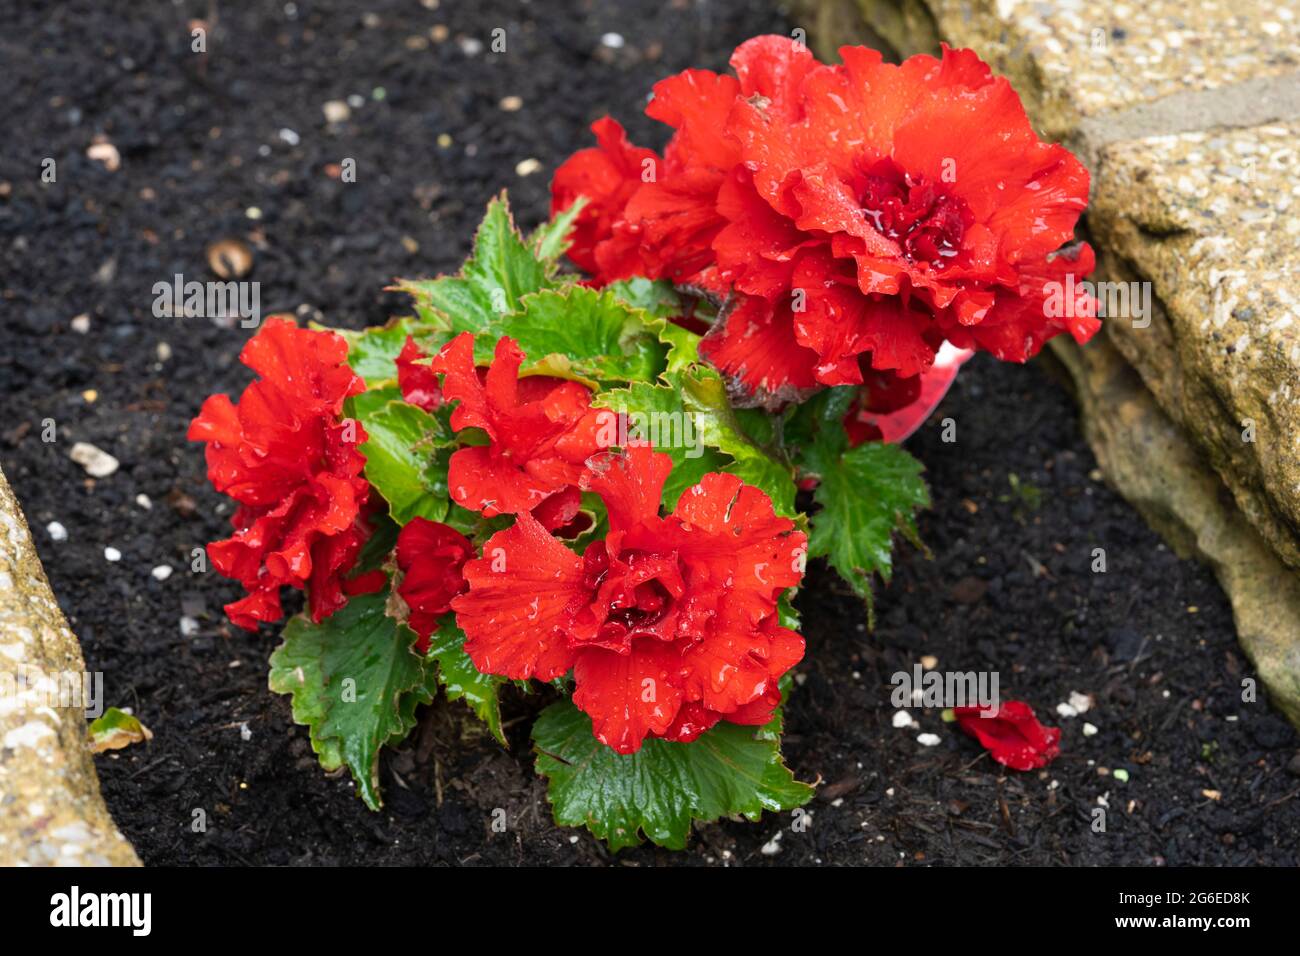 Begonia nonstop F1 red (Tuberhybrida Begonia, Begonia Tuberhybrida) flowering in July in a garden with scarlet red double flowers with raindrops. UK Stock Photo